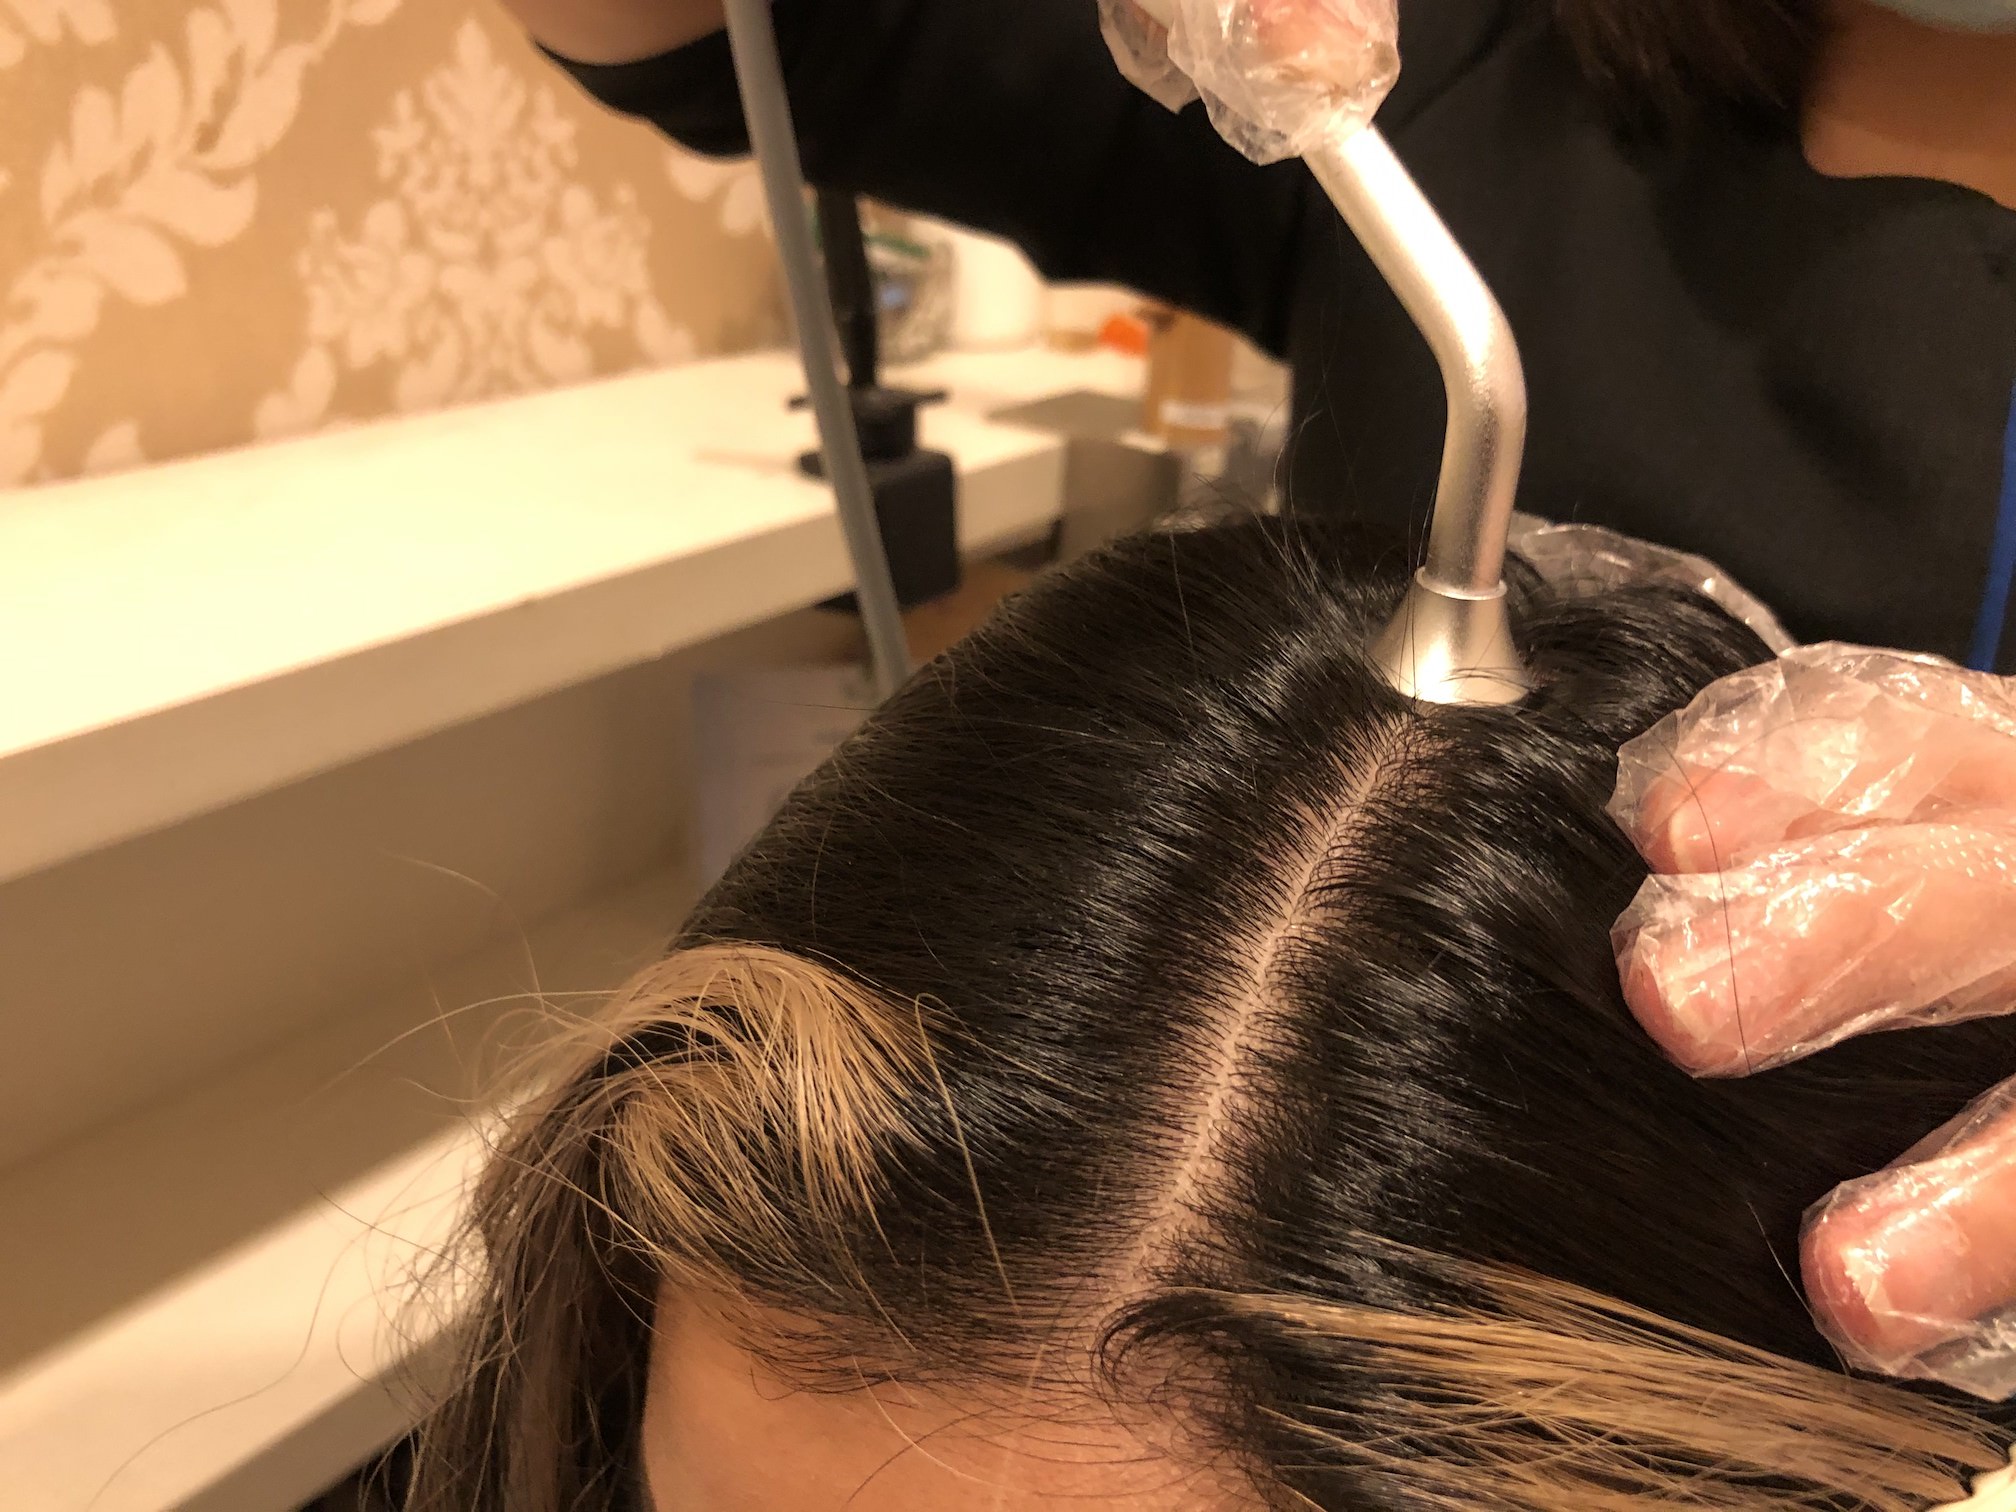 Another type of oxygenated jet, applied five times at one spot to infuse the scalp with oxygen with a fun tcht tcht sound. Photo: Coconuts Singapore